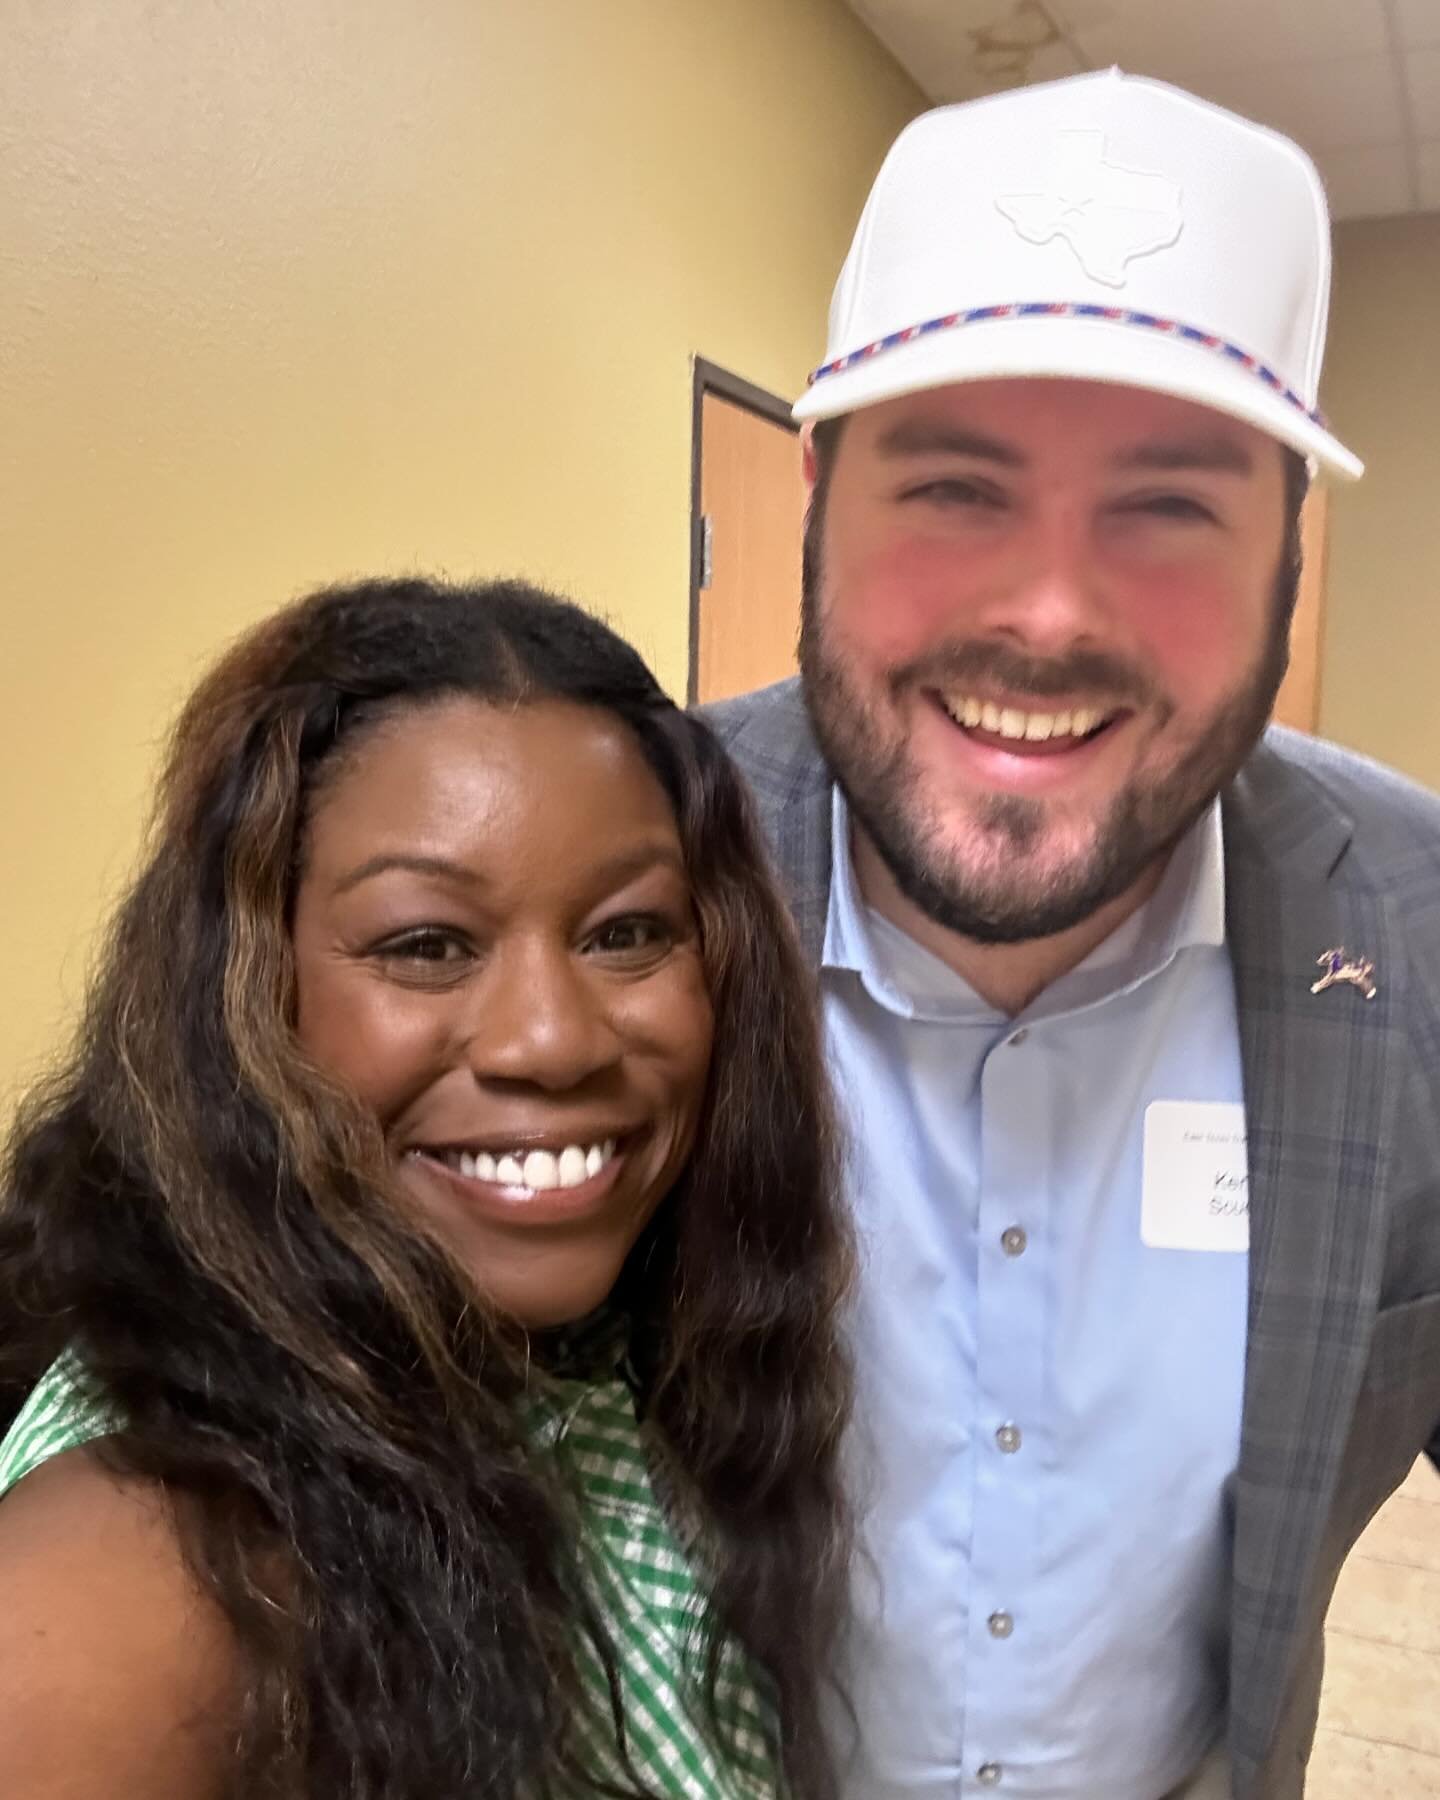 Thank you so much, East Texas Caucus, for inviting me to speak. It was especially rewarding to run into remarkable individuals like Shirley Layton, Burke Wilkison and Kendall Scudder from the State Party. Neighbors, as I mentioned in my speech, let&r